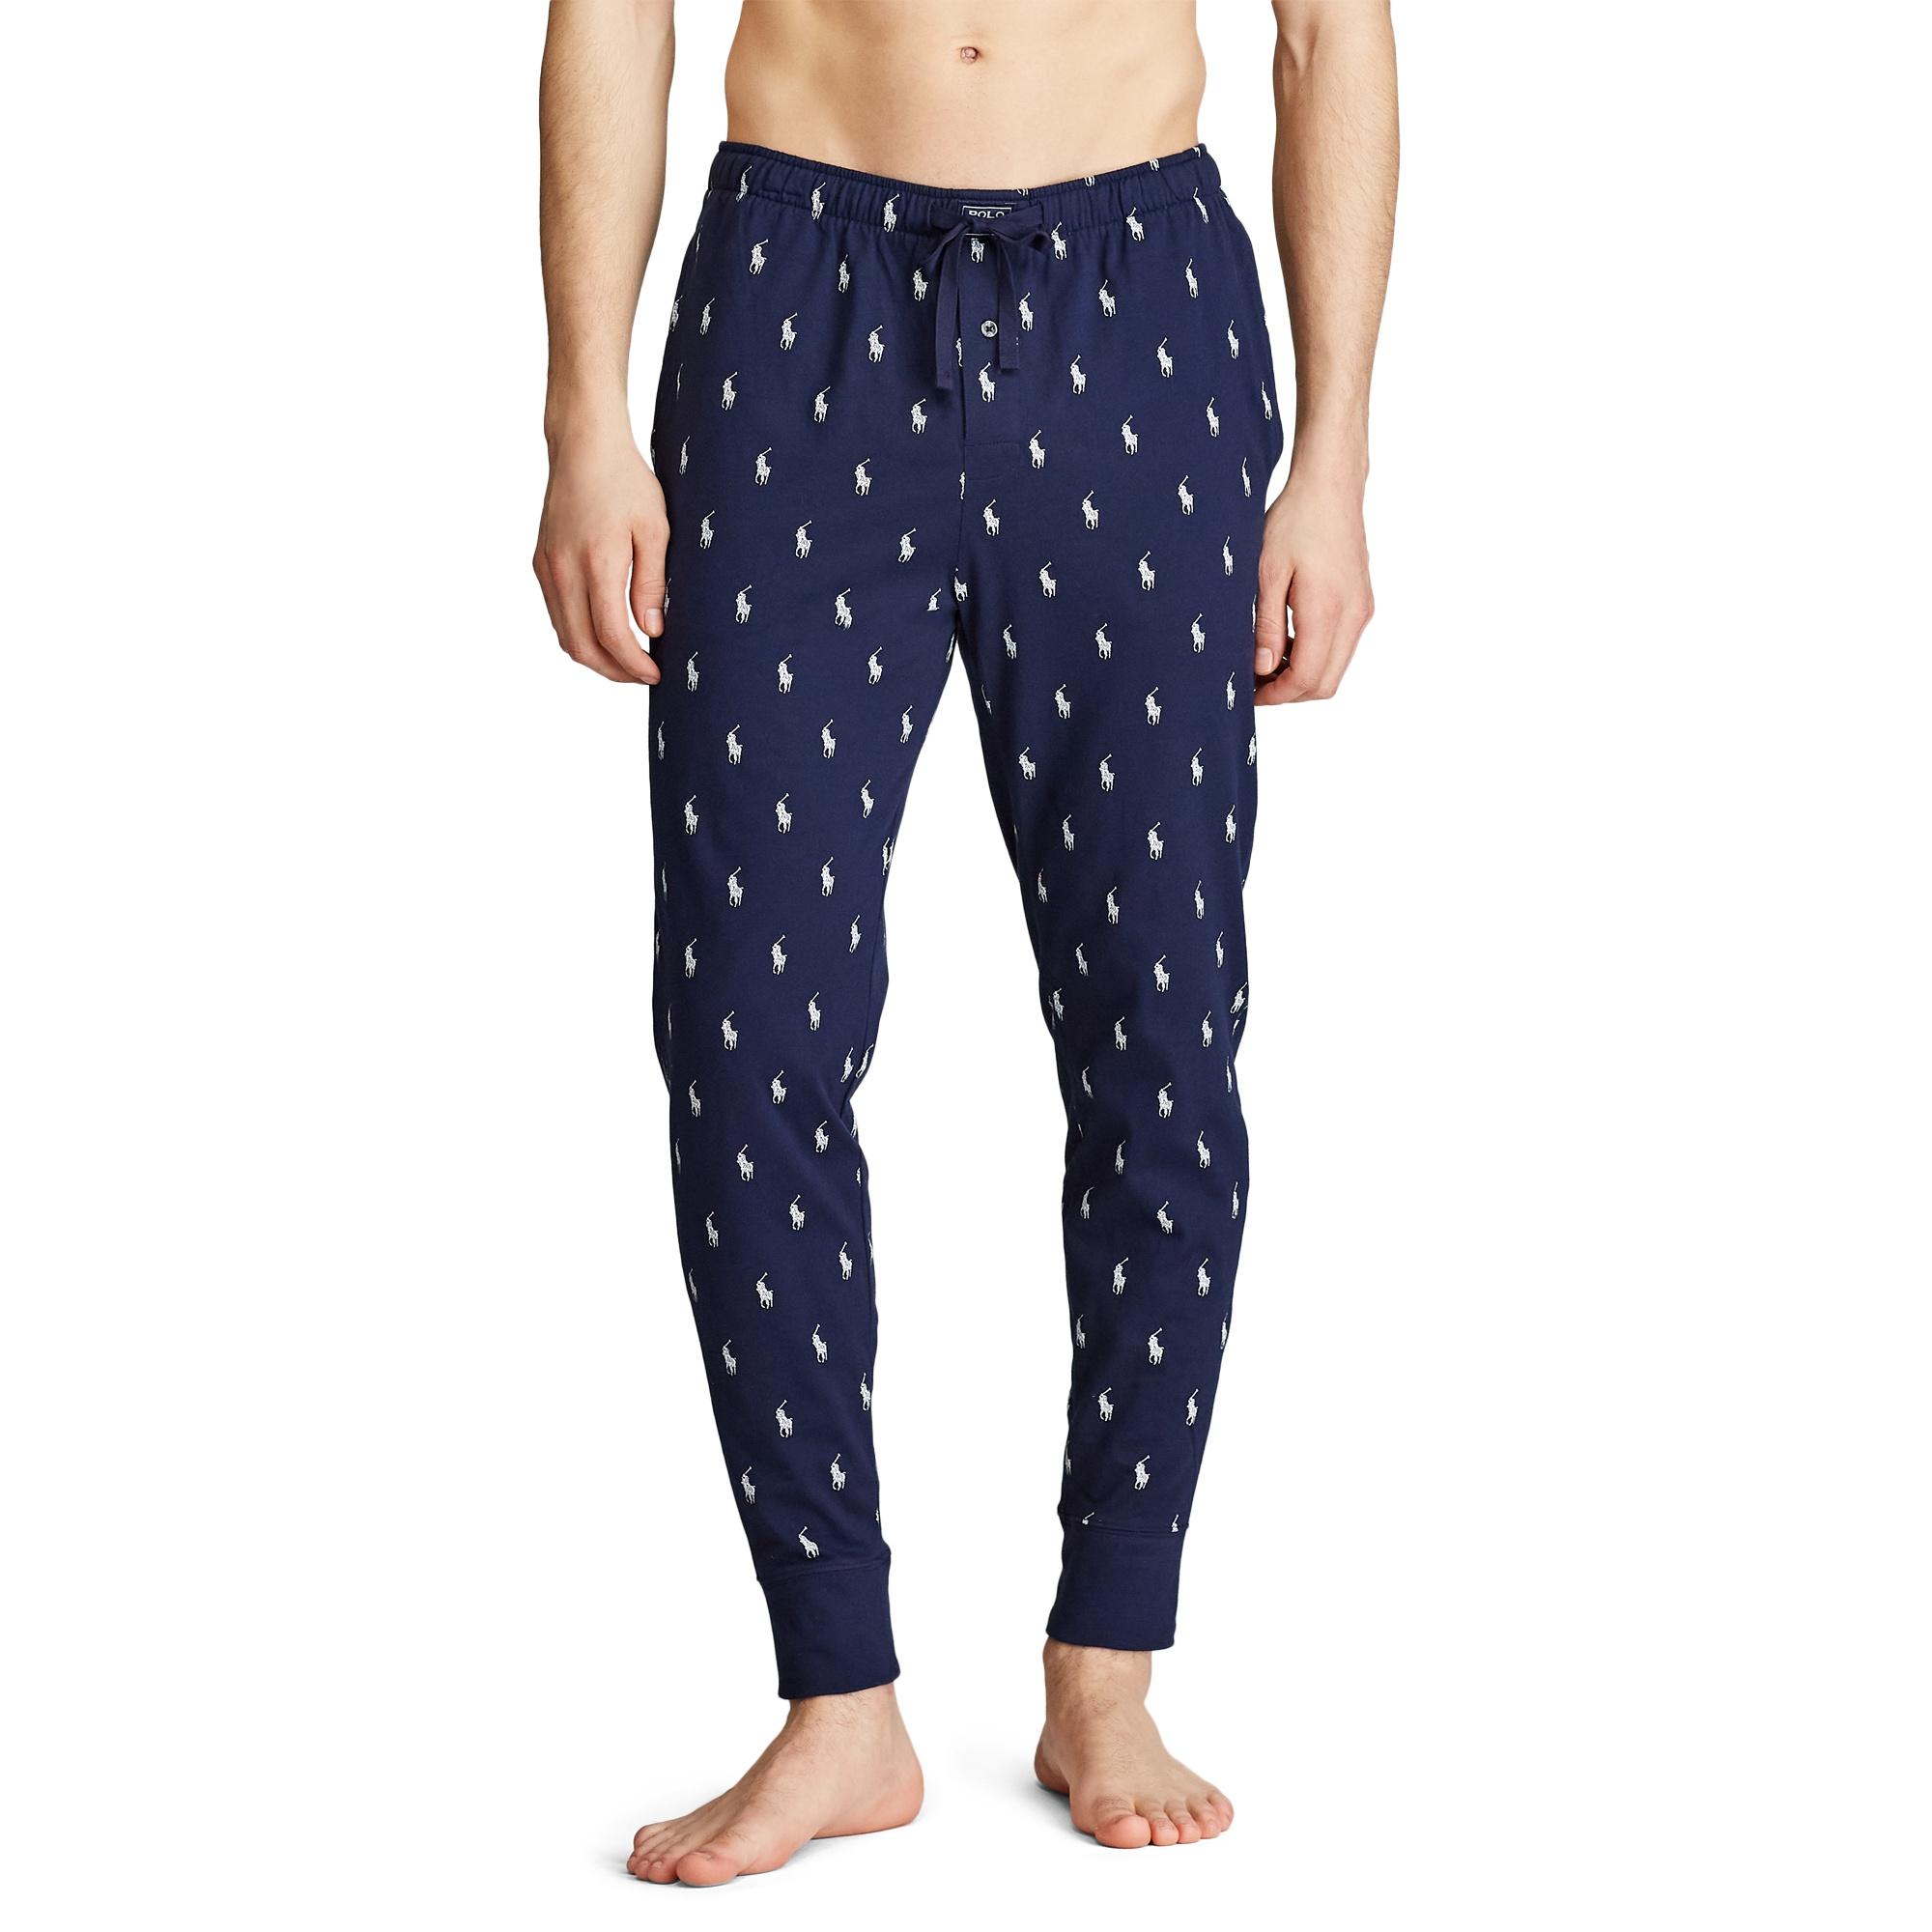 Polo Ralph Lauren Cotton Pony Print Pajama Jogger Pants in Navy (Blue) for  Men - Save 49% - Lyst